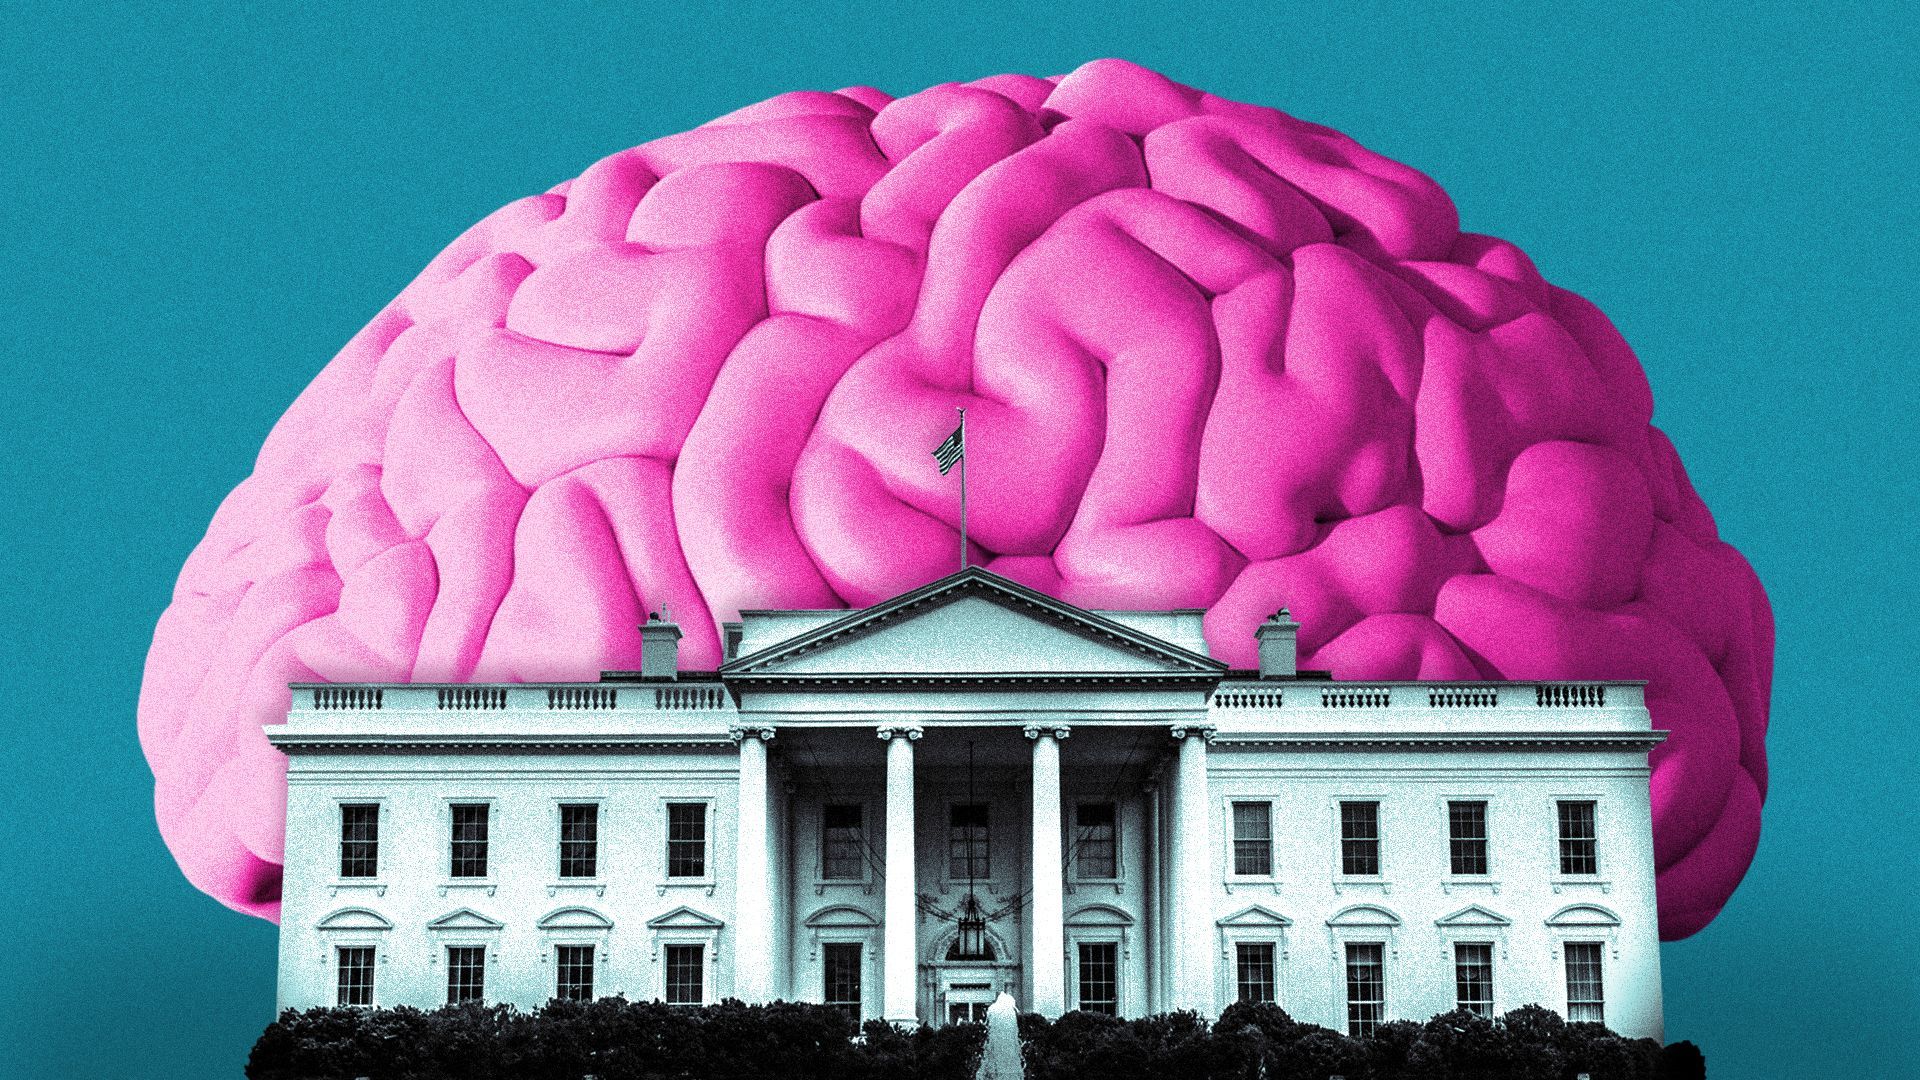 Illustration of the White House in front of a giant brain.